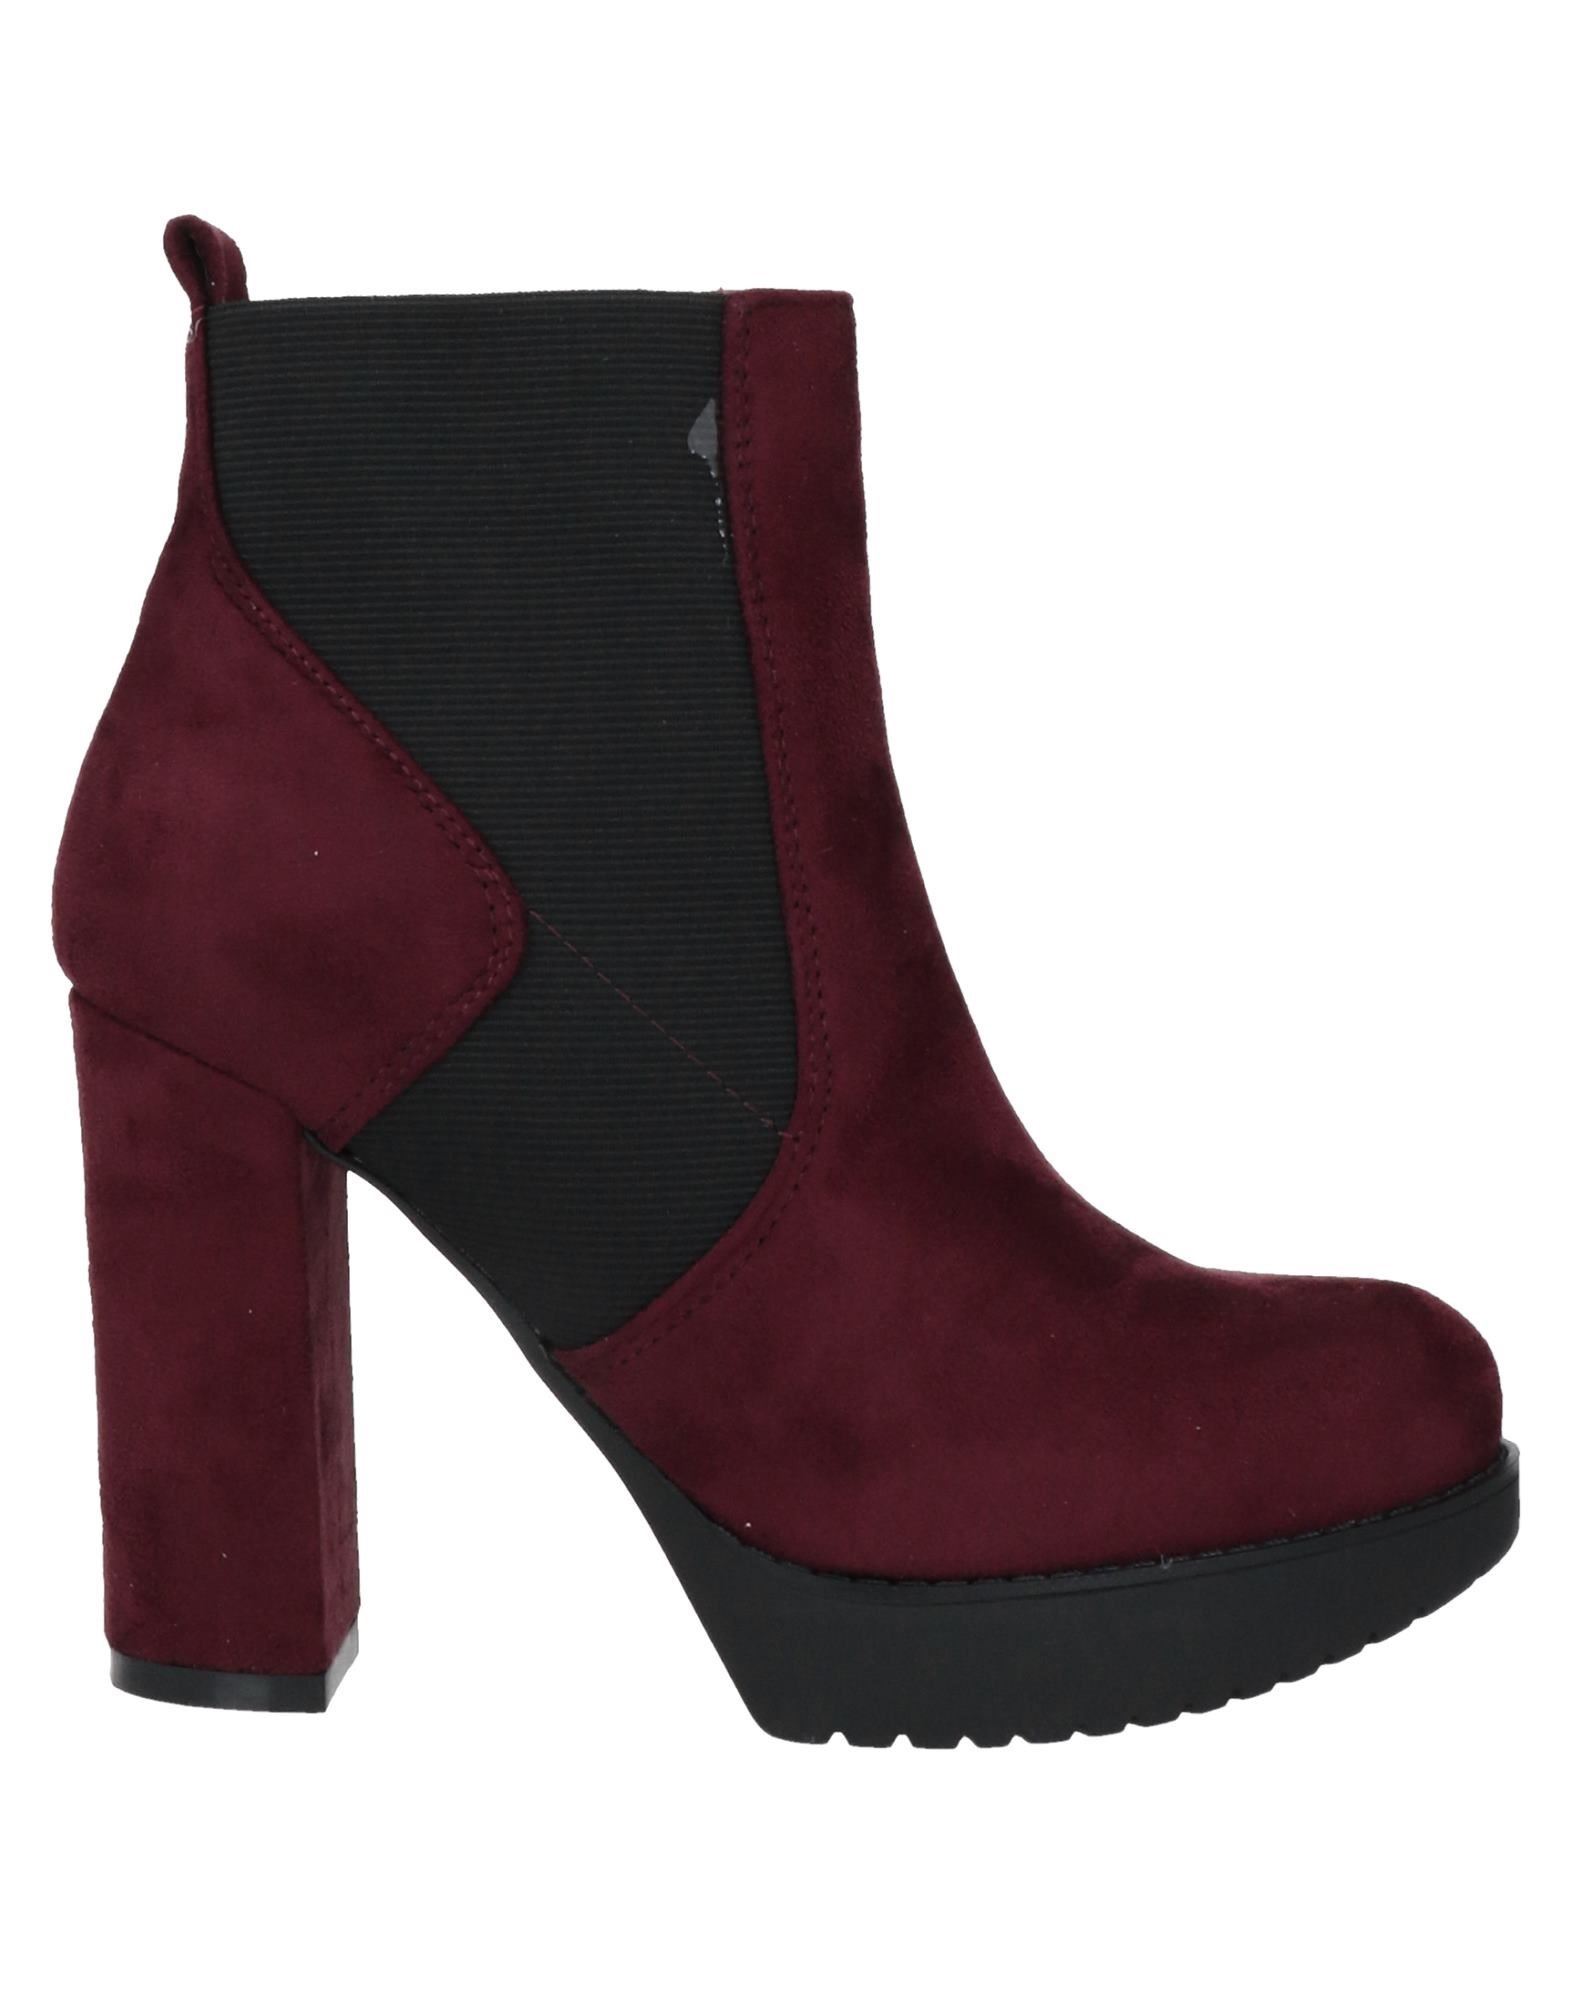 Sexy Woman Ankle Boots In Maroon